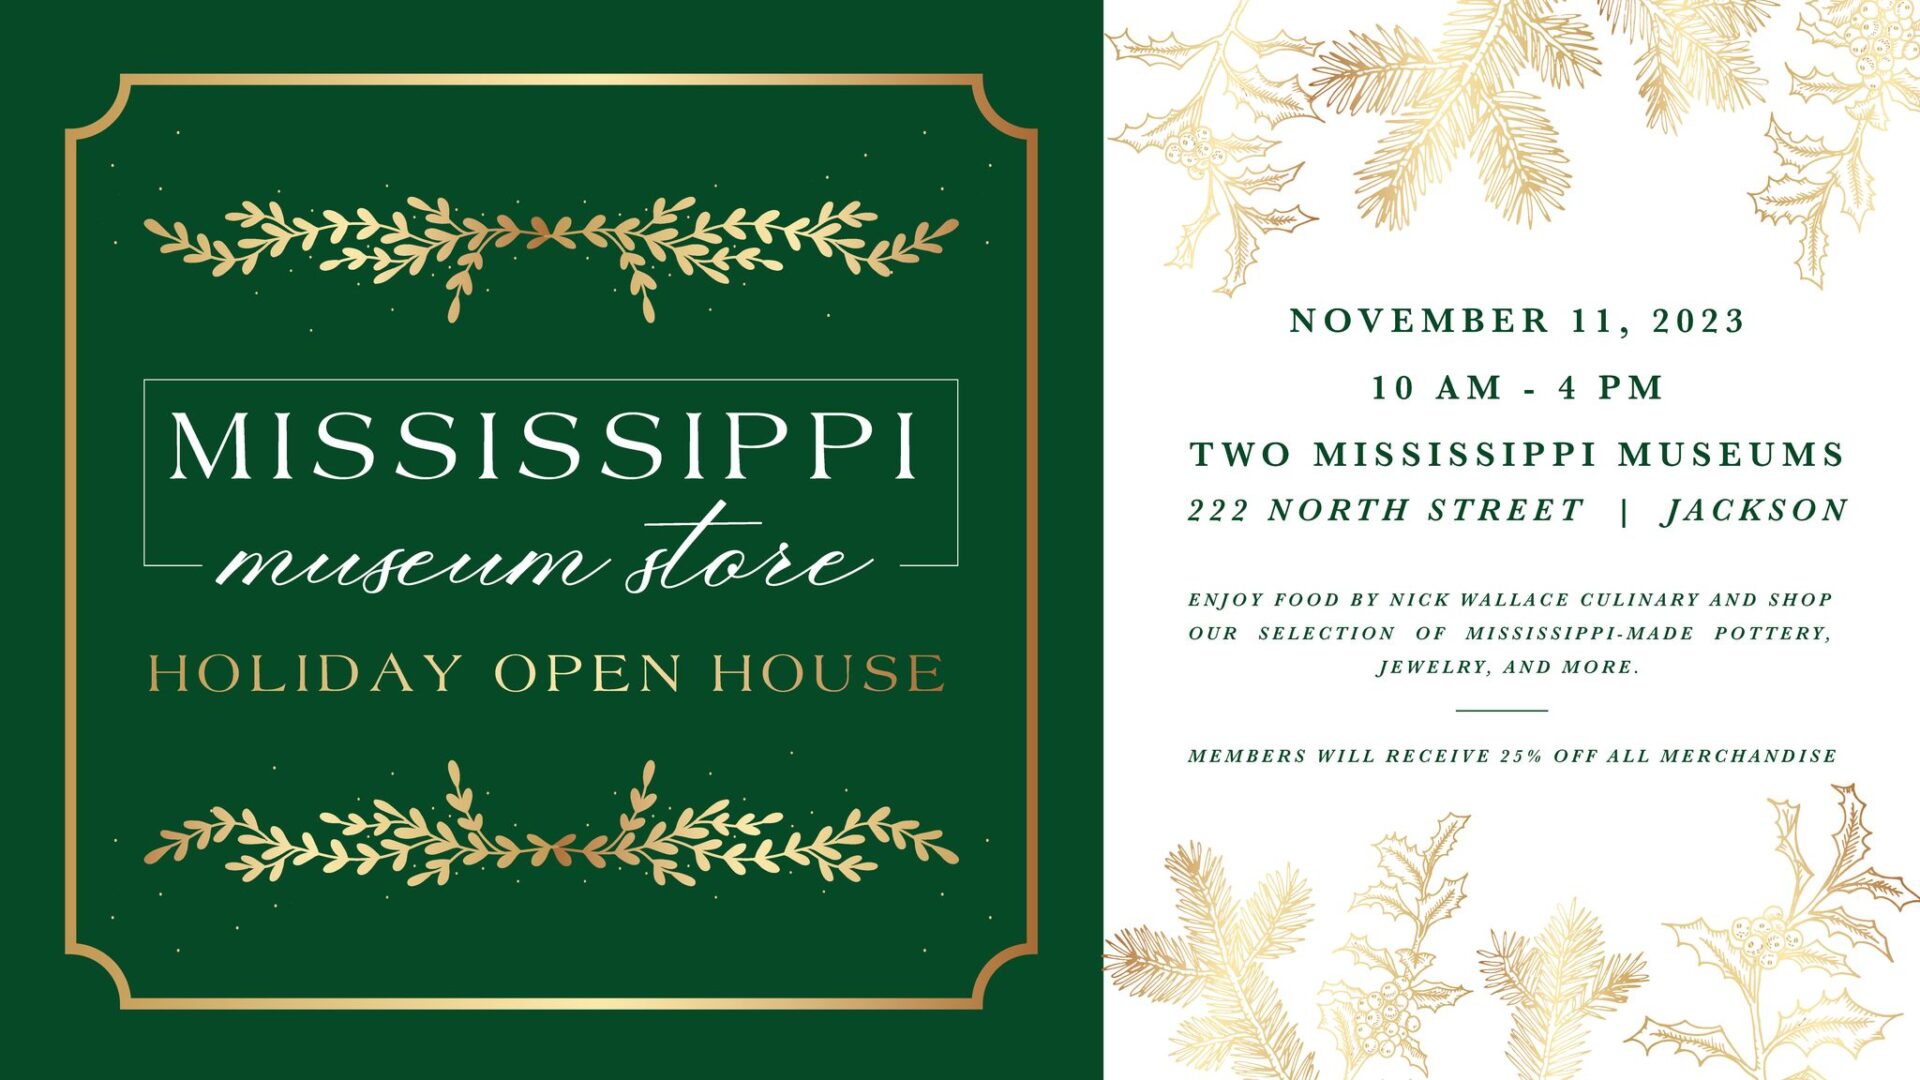 Holiday Open House | MDAH